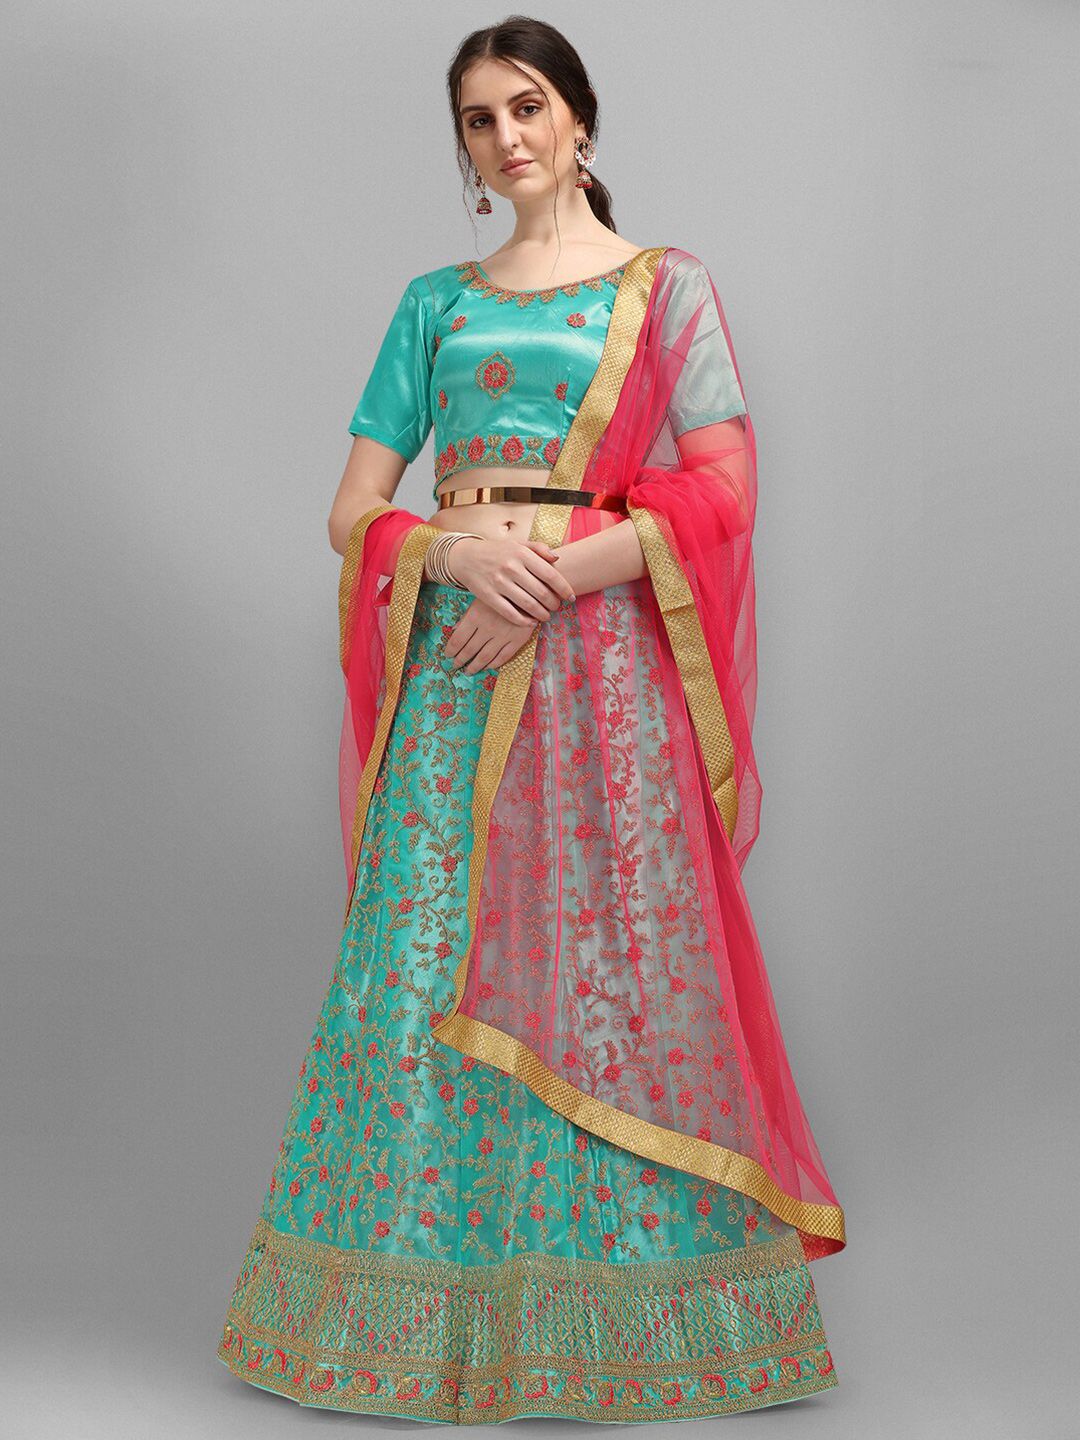 V SALES Turquoise Blue & Pink Embroidered Semi-Stitched Lehenga & Unstitched Blouse With Dupatta Price in India